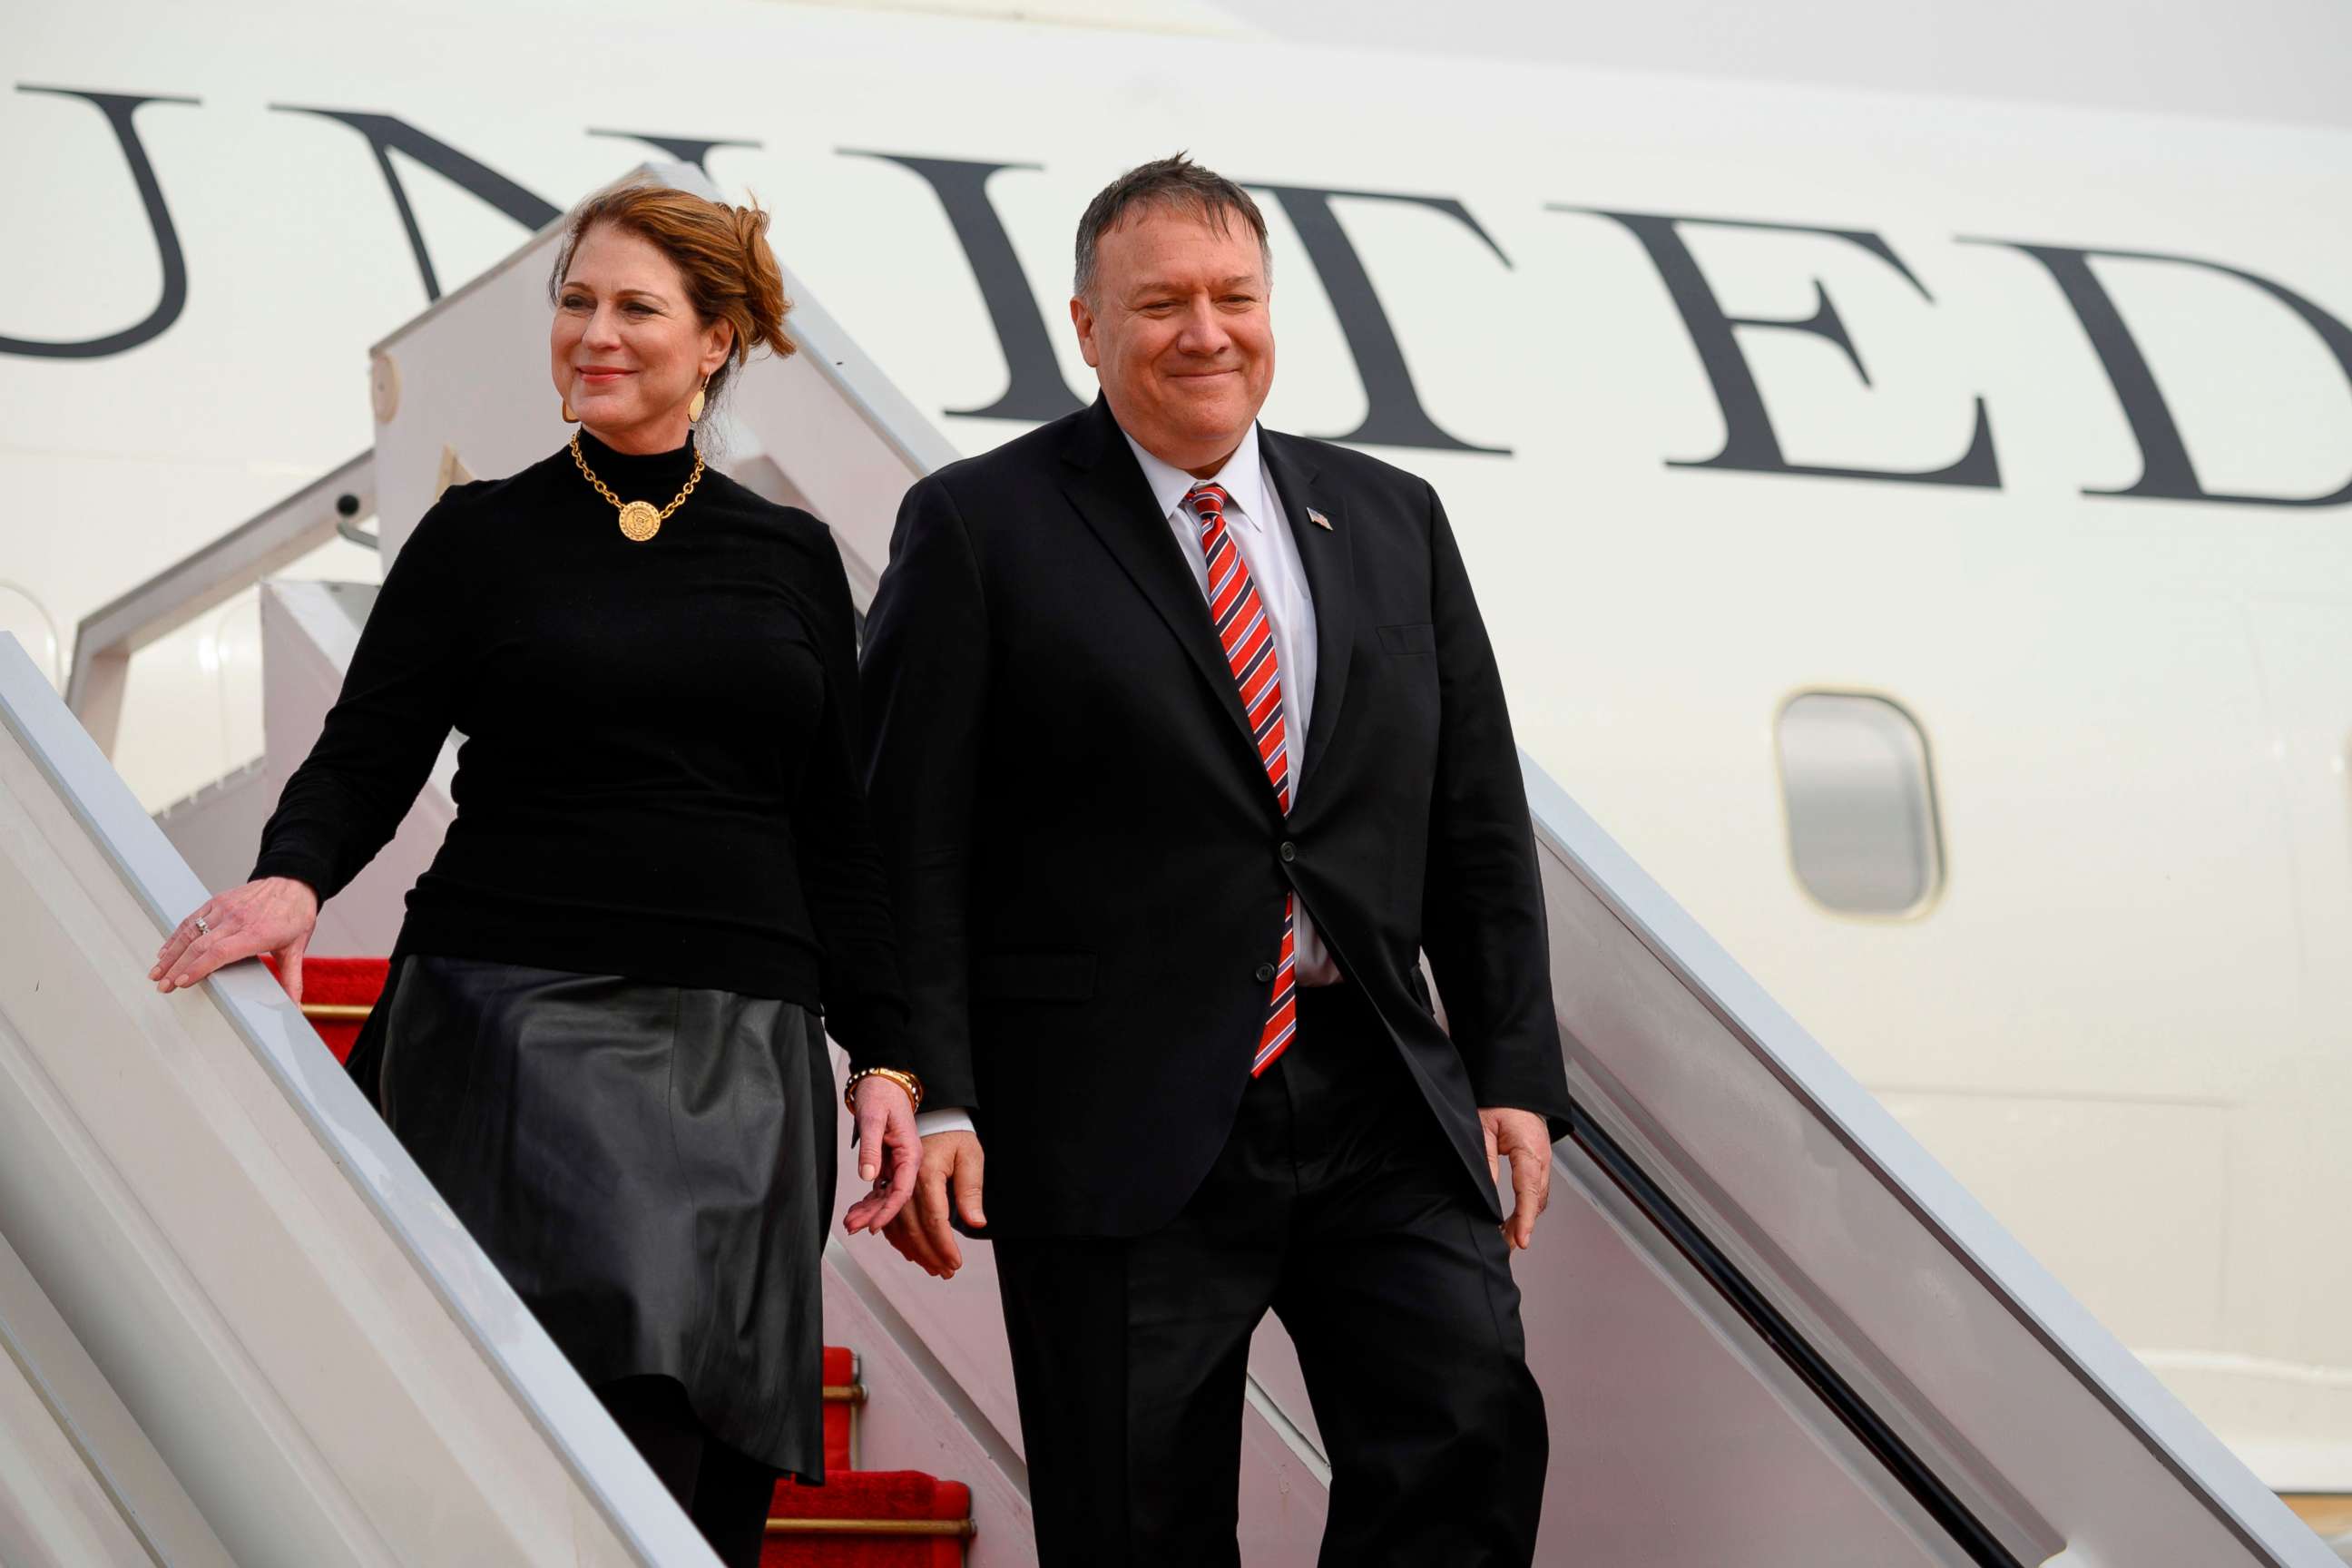 PHOTO: Secretary of State Mike Pompeo and his wife Susan Pompeo arrive at Blaise Diagne International Airport in Senegal on Feb. 15, 2020.